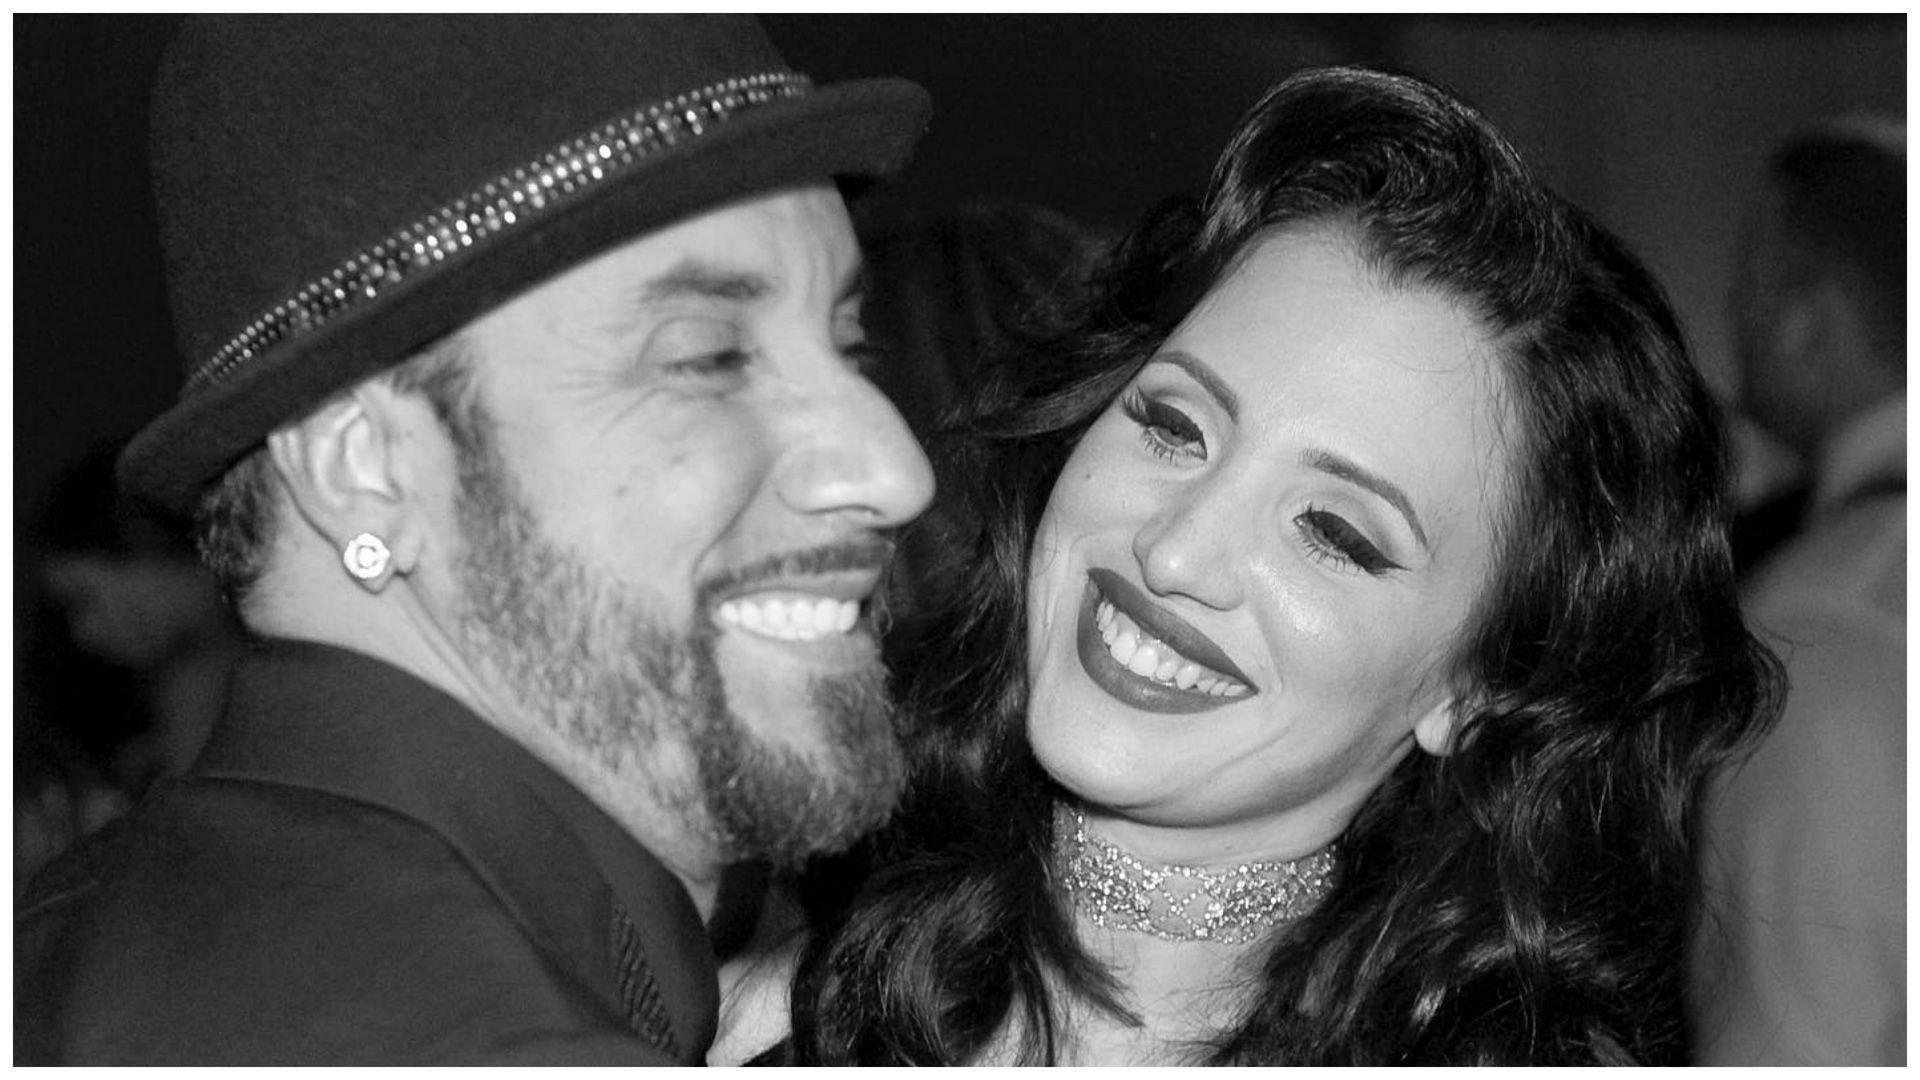 AJ McLean and Rochelle announce the end of their marriage (Image via Instagram/@rochelle_deanna)